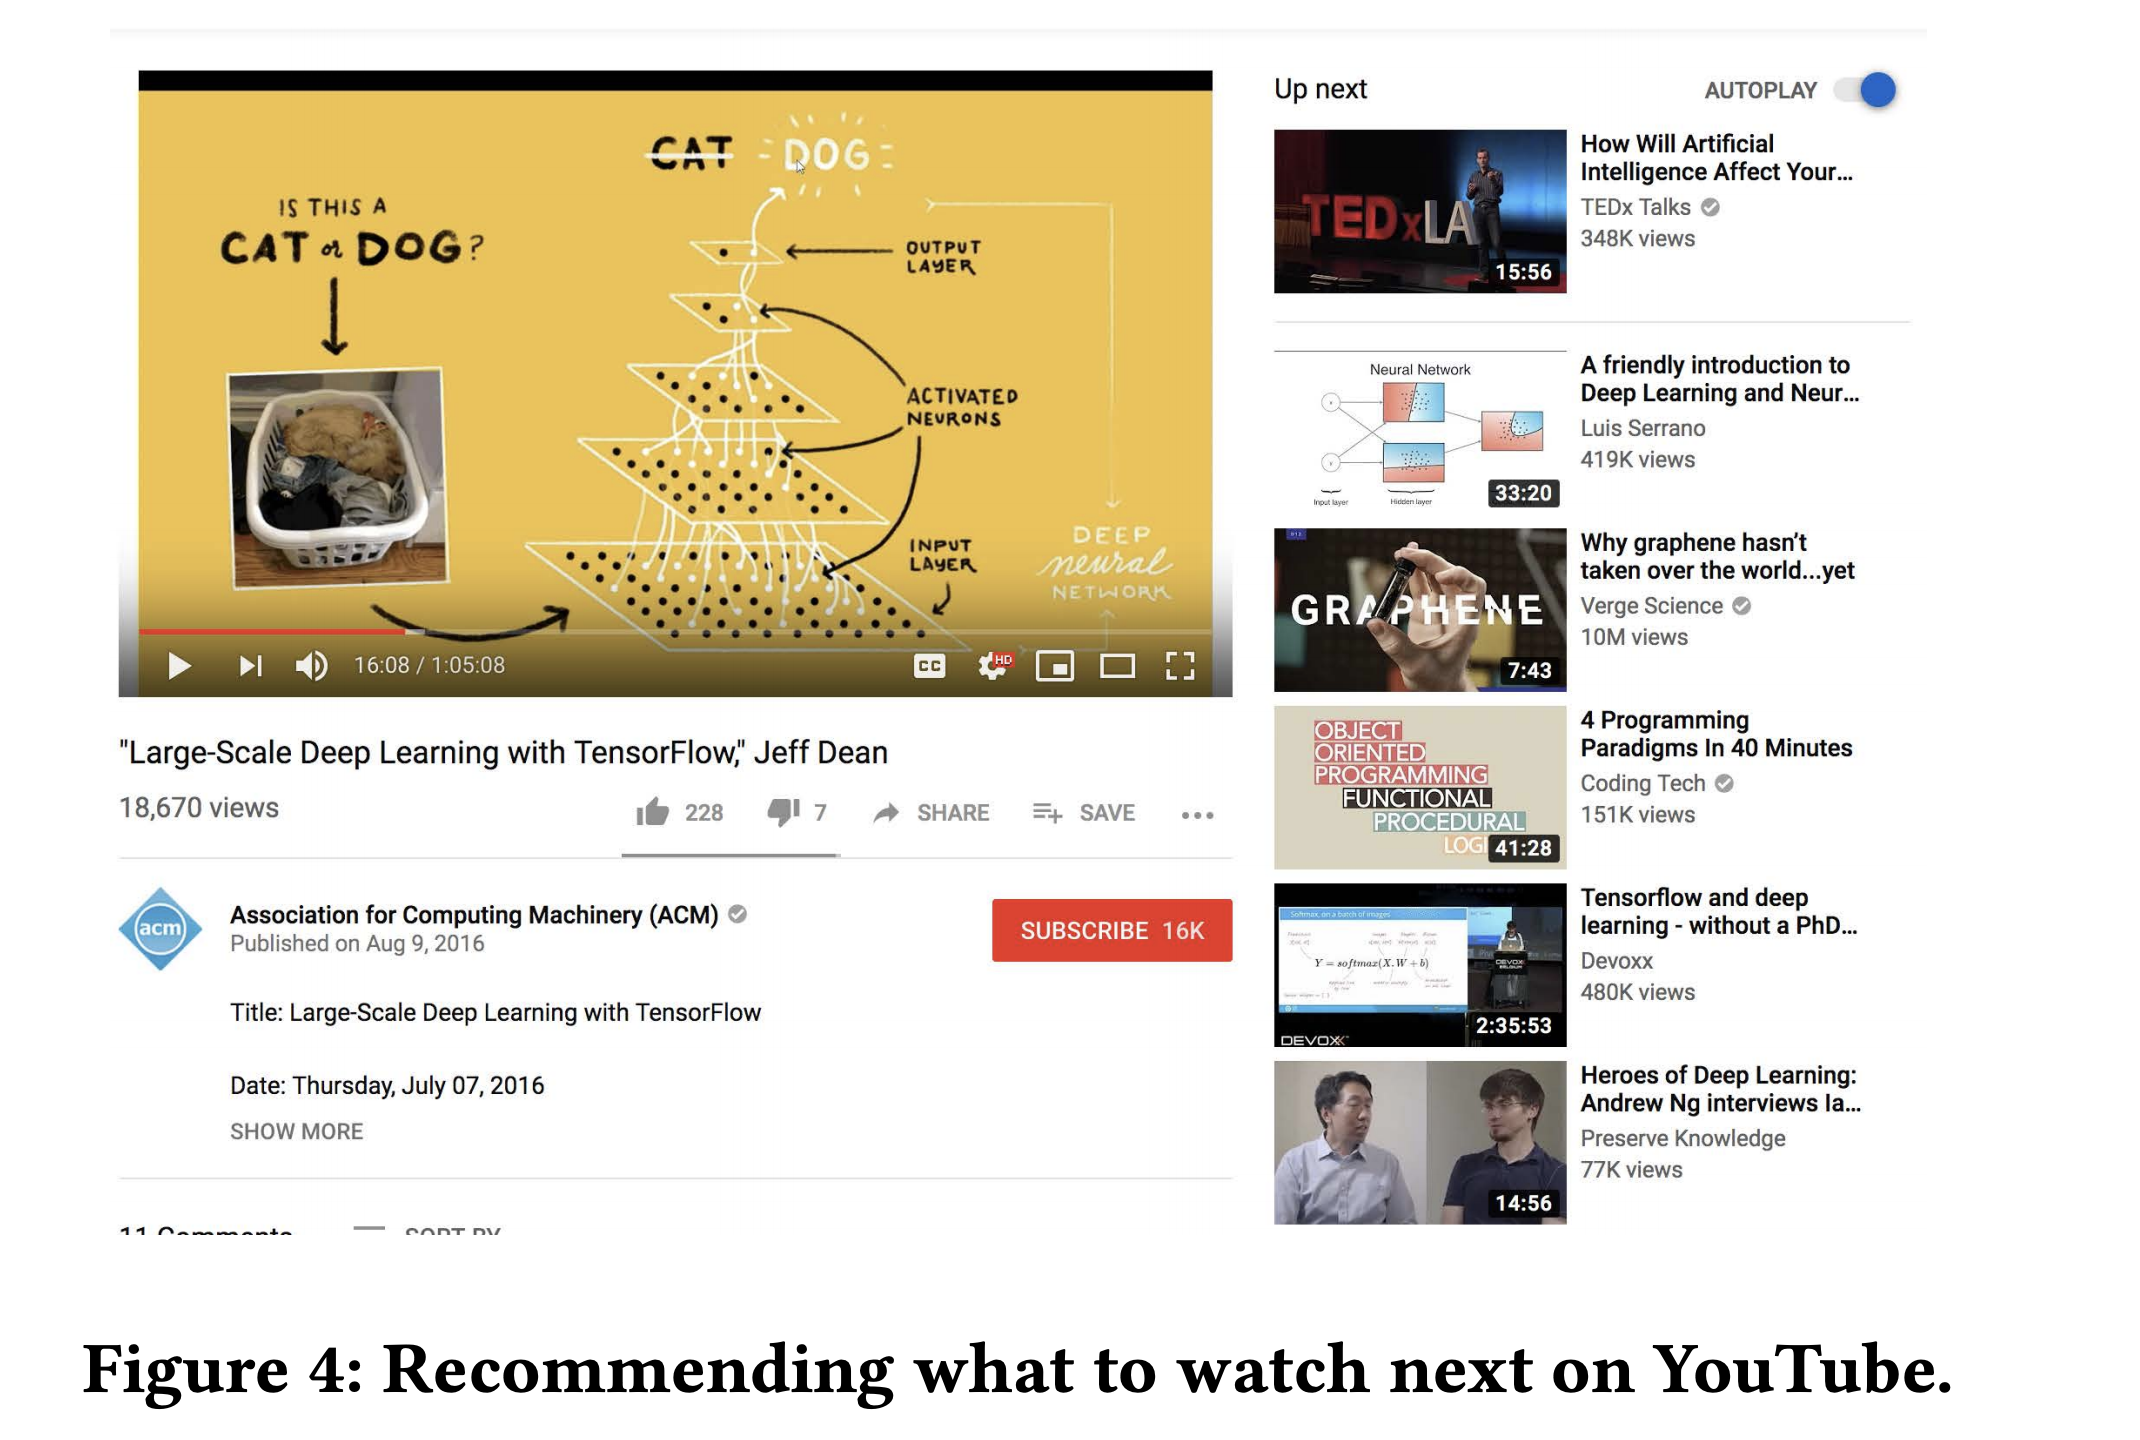 Figure 4: Recommending what to watch next on YouTube.